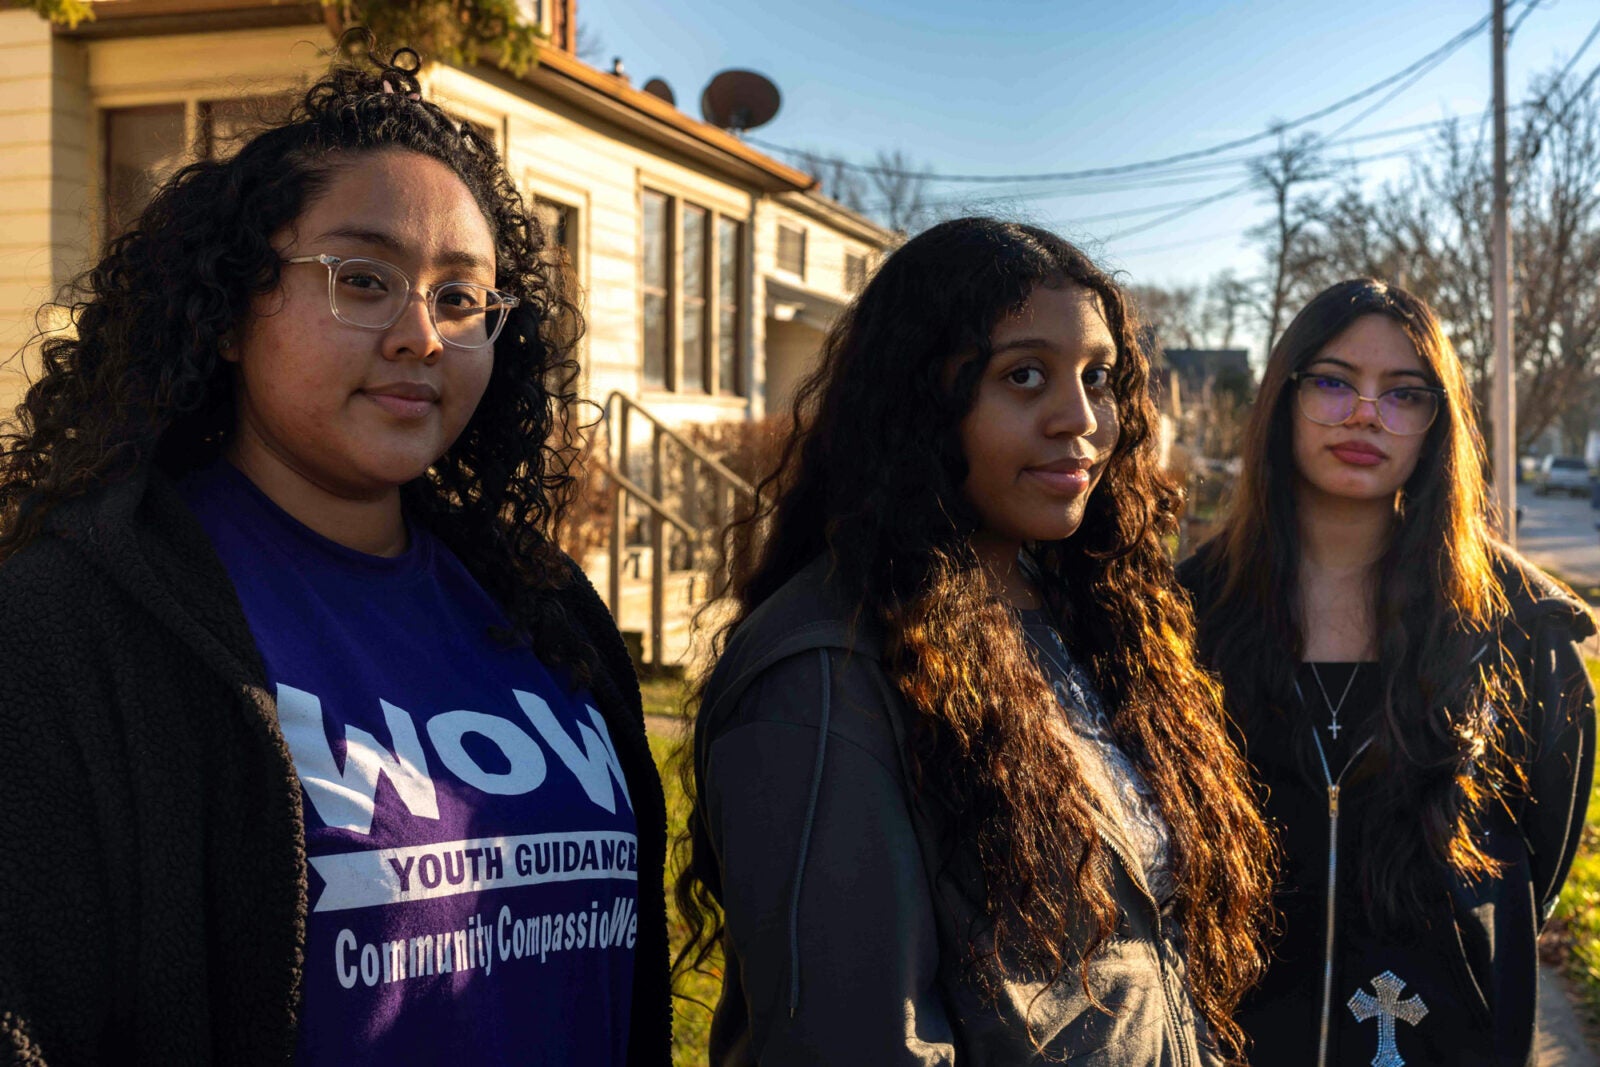 Three women wearing hoodies and t-shirts pose for the camera. They are part of a womanhood support program working with eighth graders in Waukegan, Illinois.